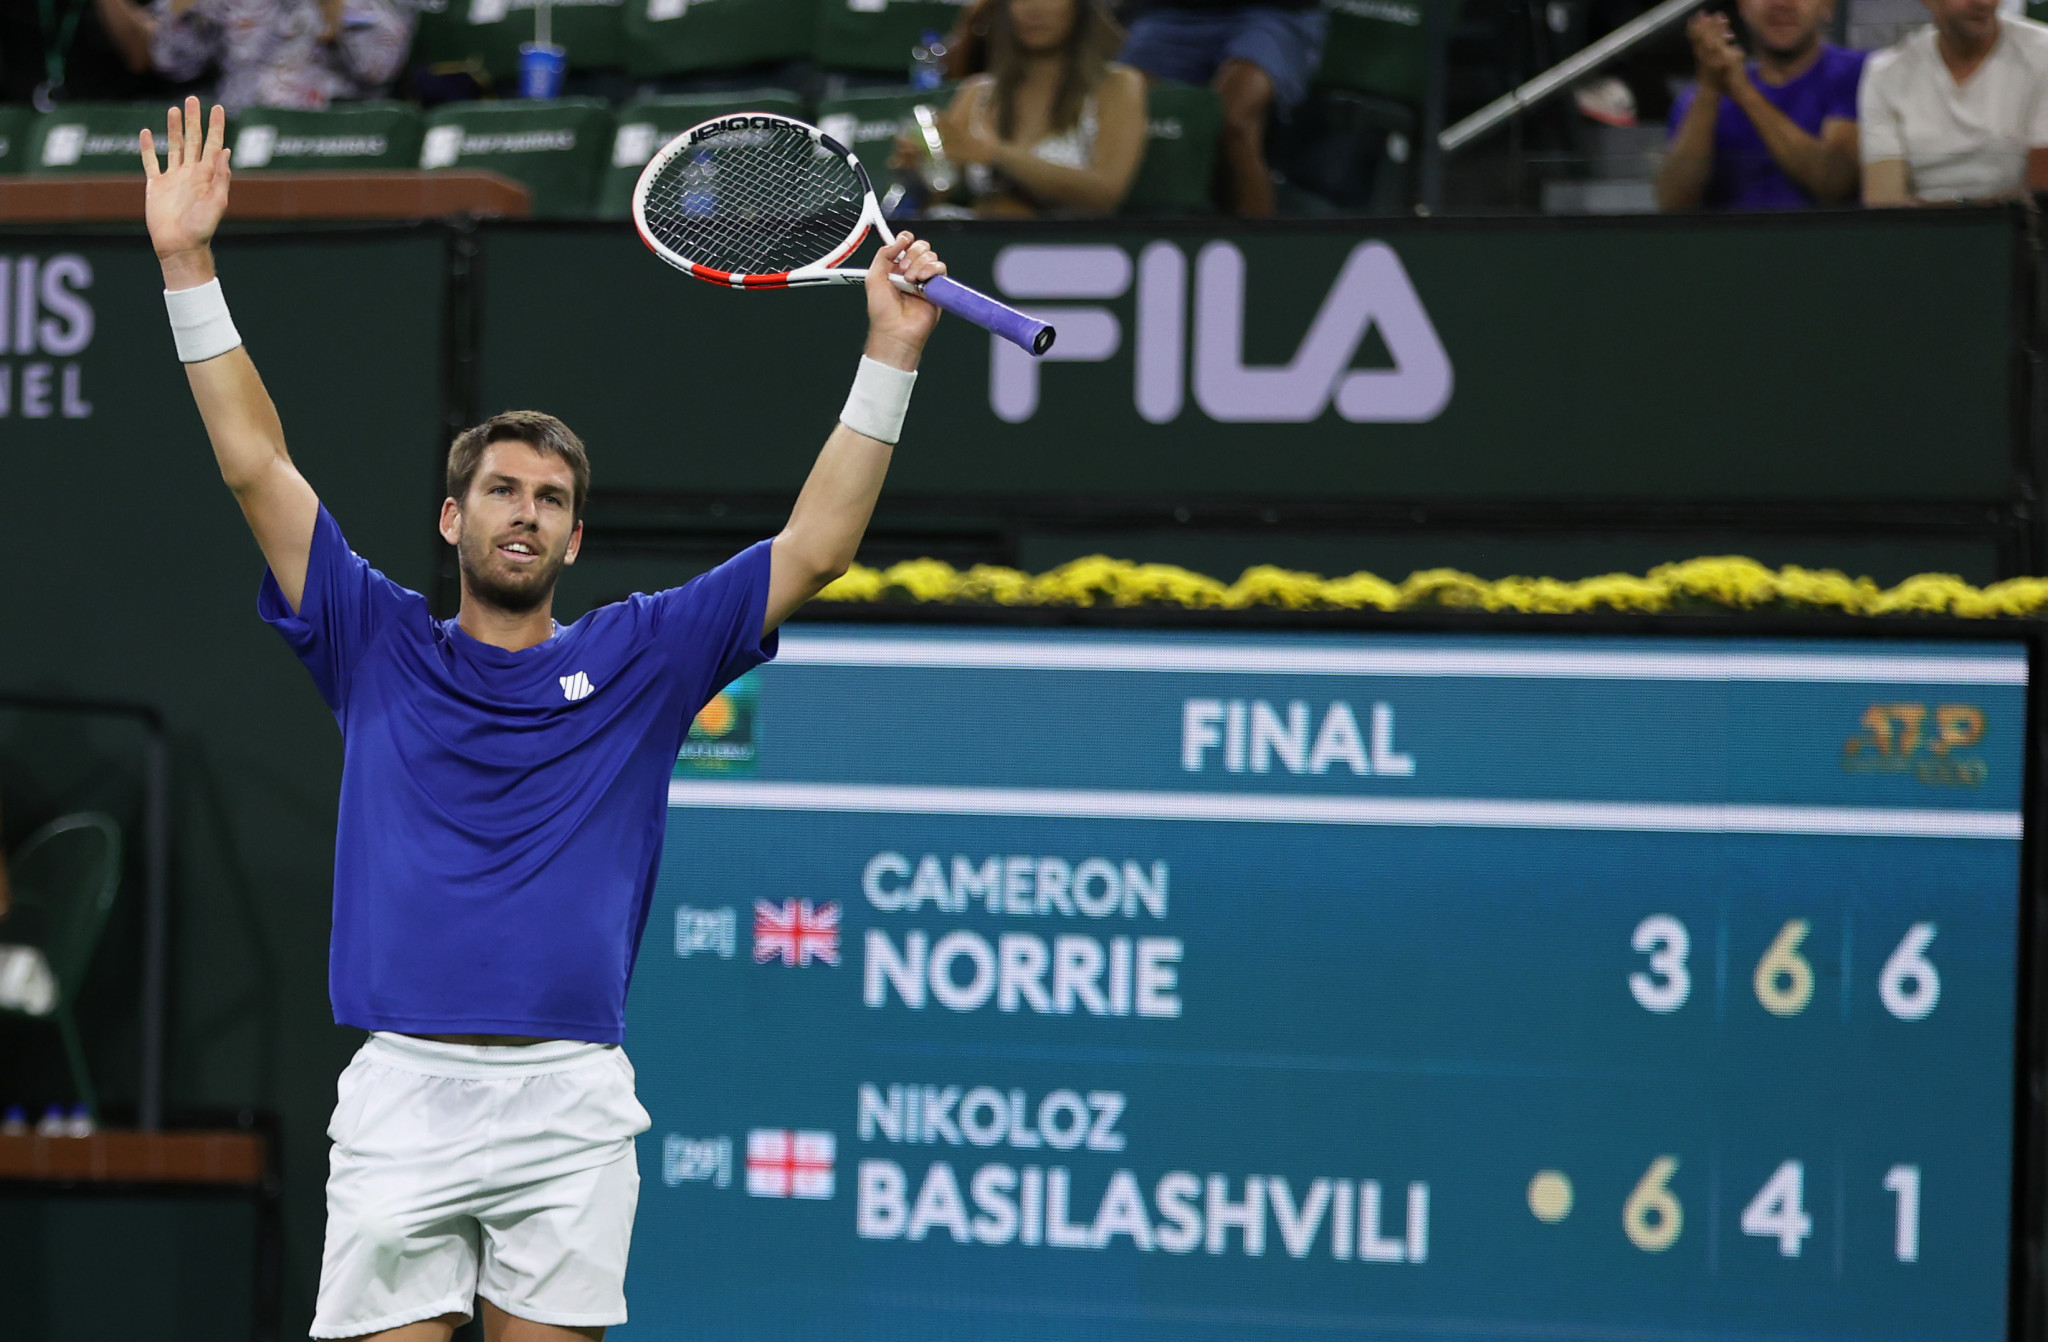 Britain's Cameron Norrie came from behind to beat Georgia's Nikoloz Basilashvili in the men's singles final ©Getty Images